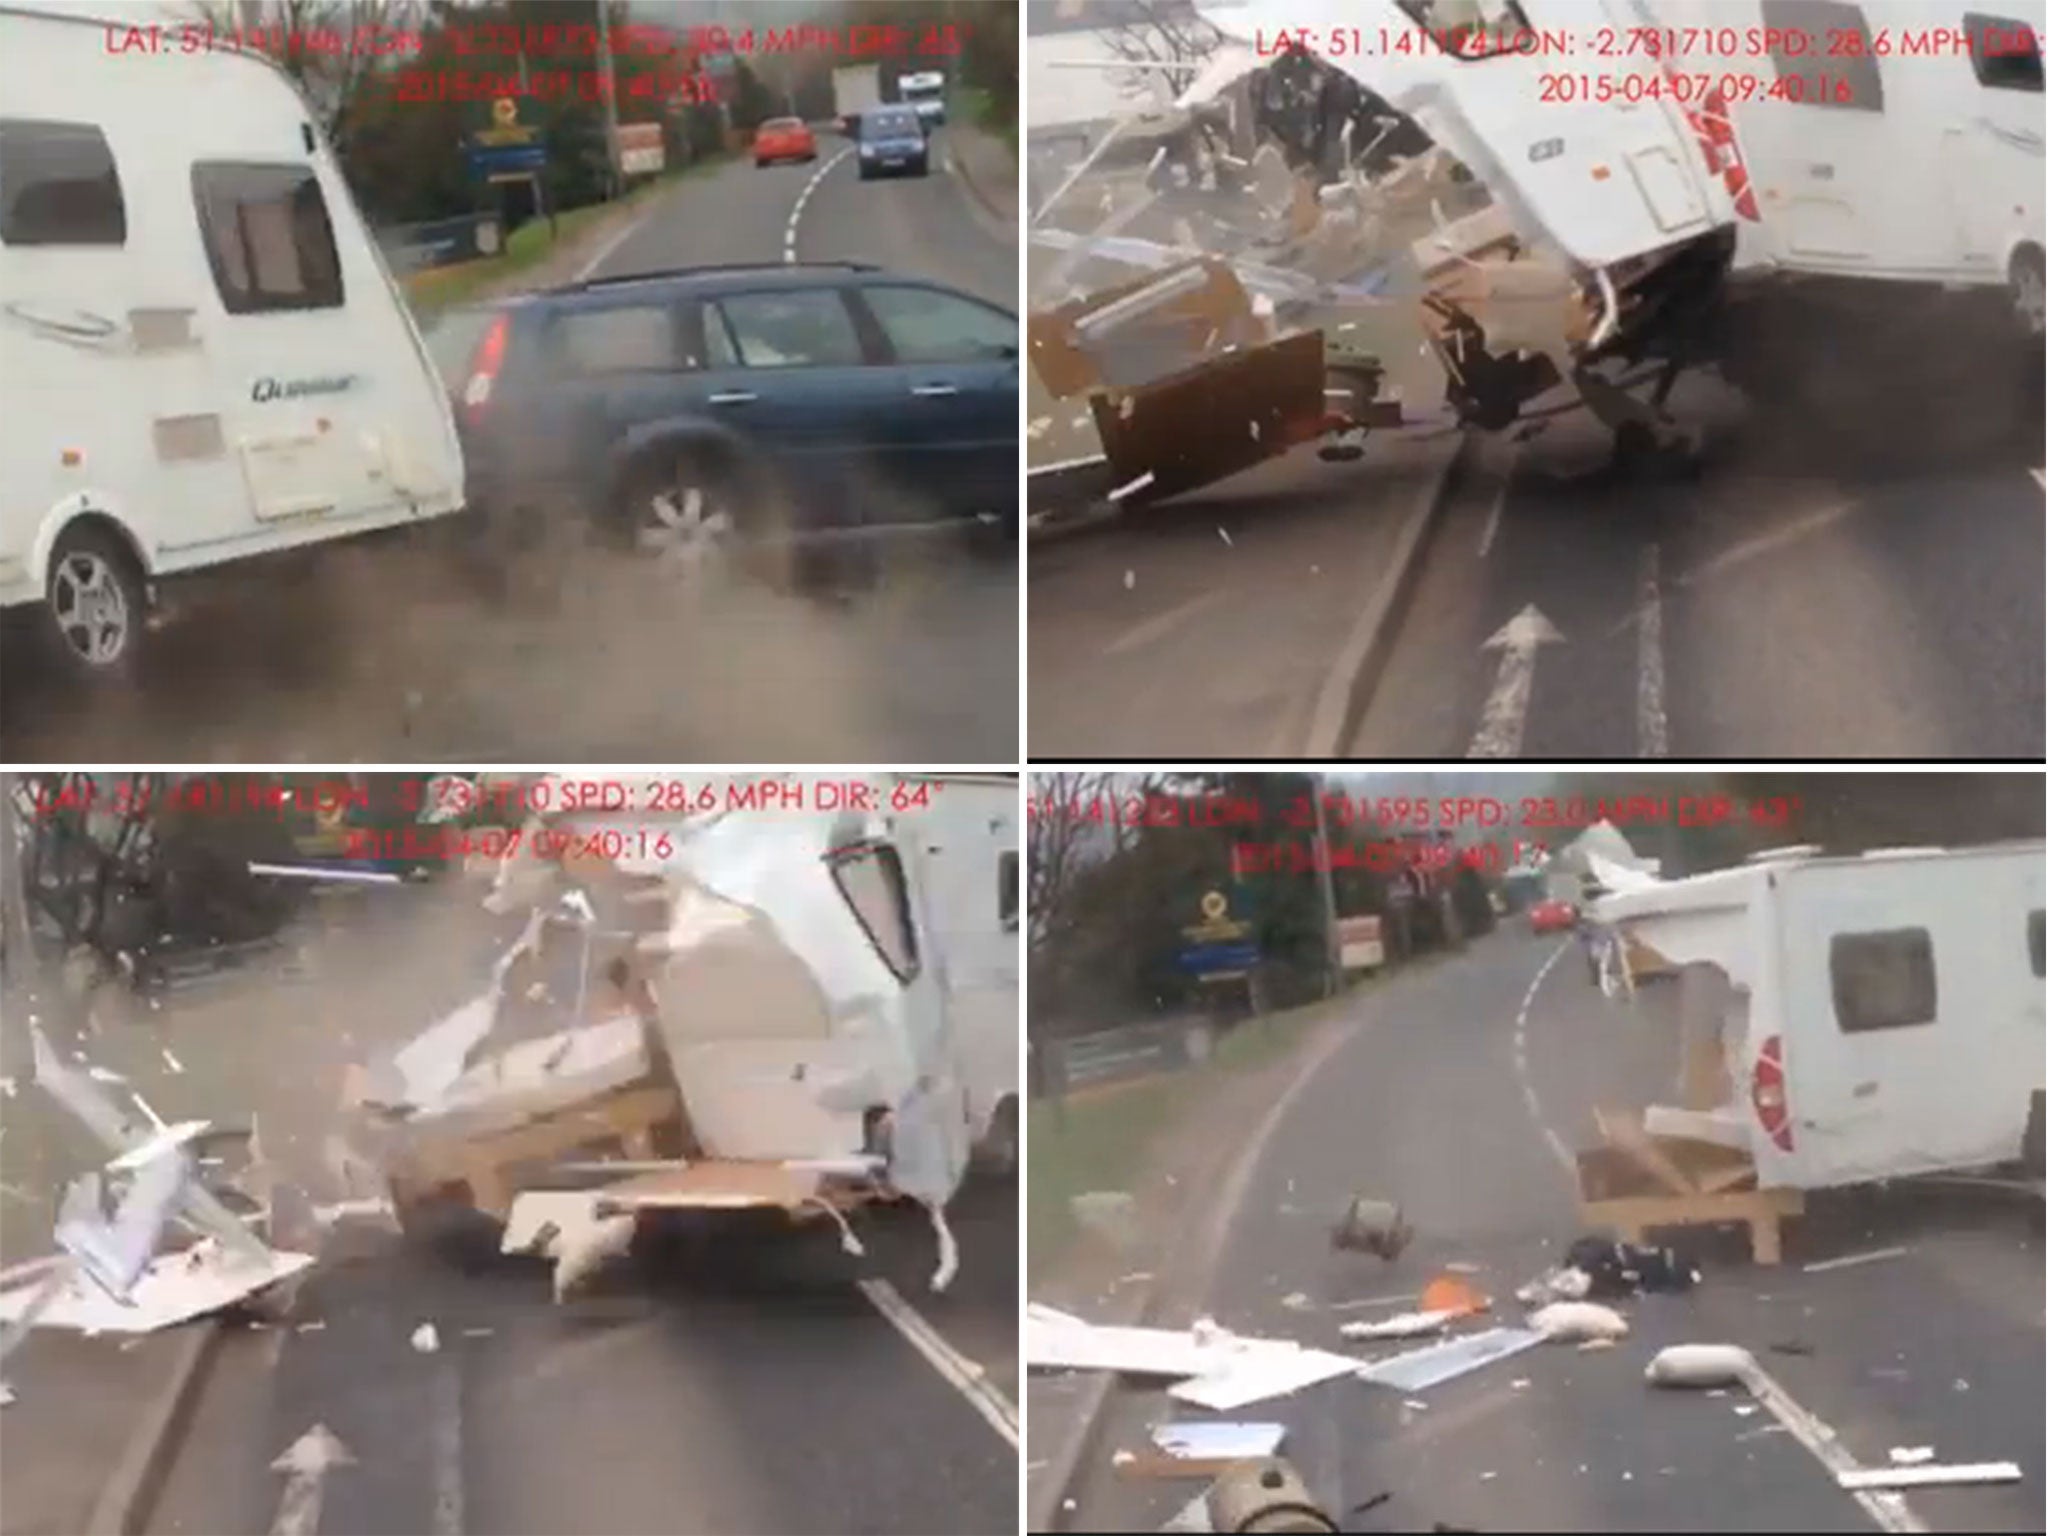 The crash occurred after the caravan driver attempted a risky overtaking manouevre